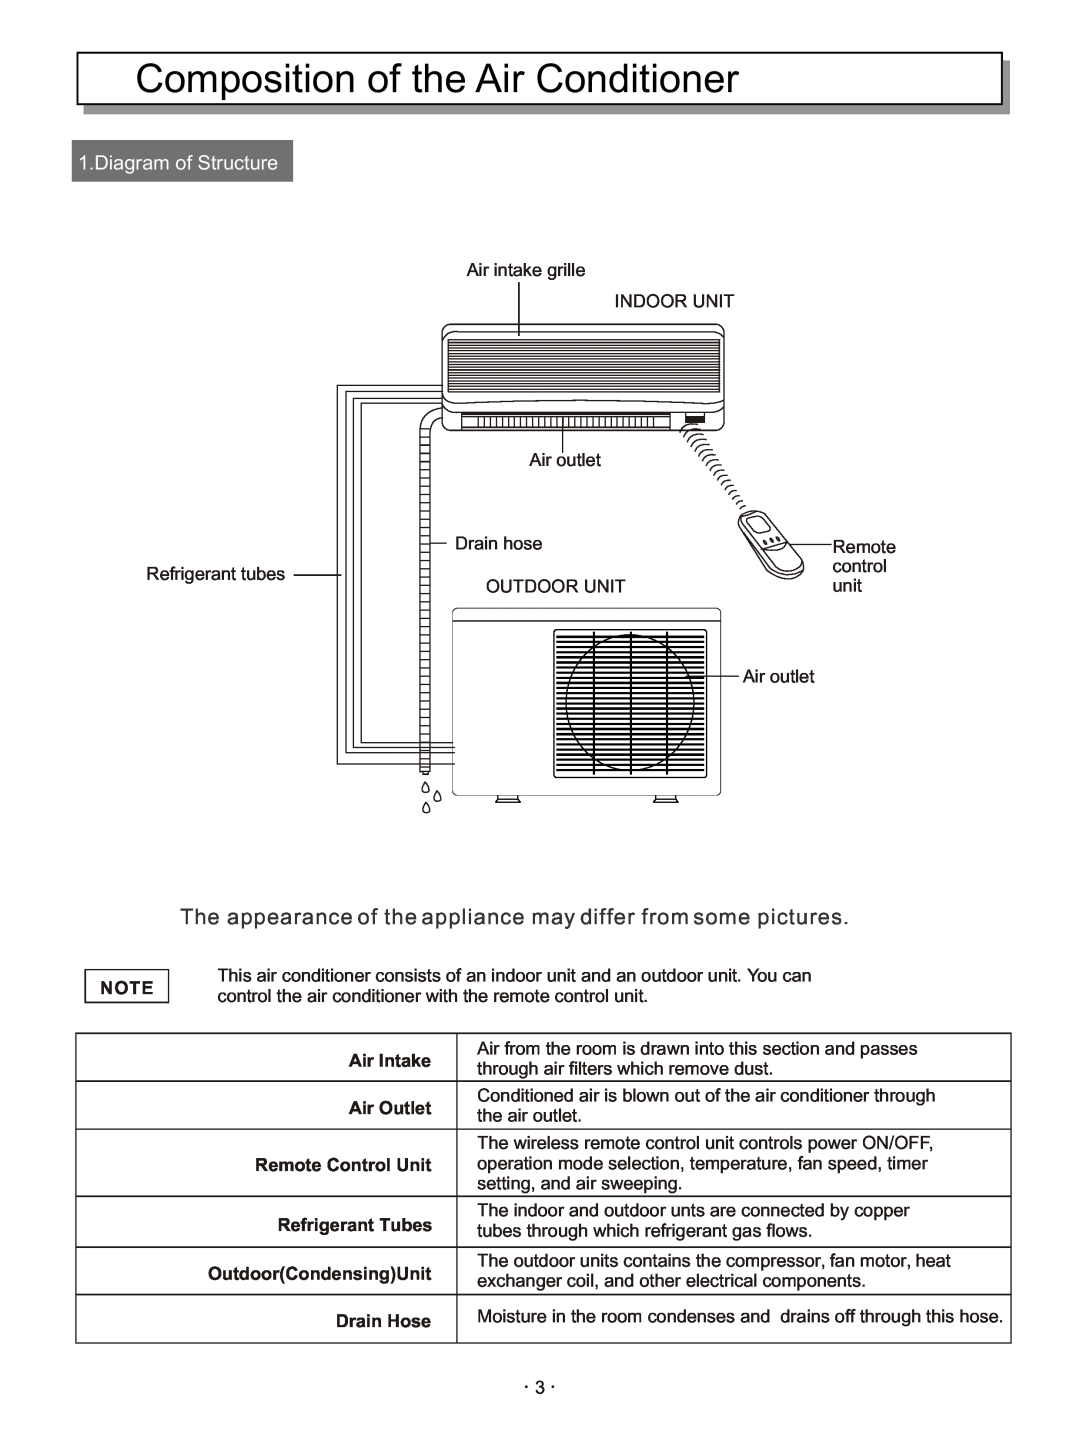 Hisense Group KFR-3208GW instruction manual Composition of the Air Conditioner, Diagram of Structure 